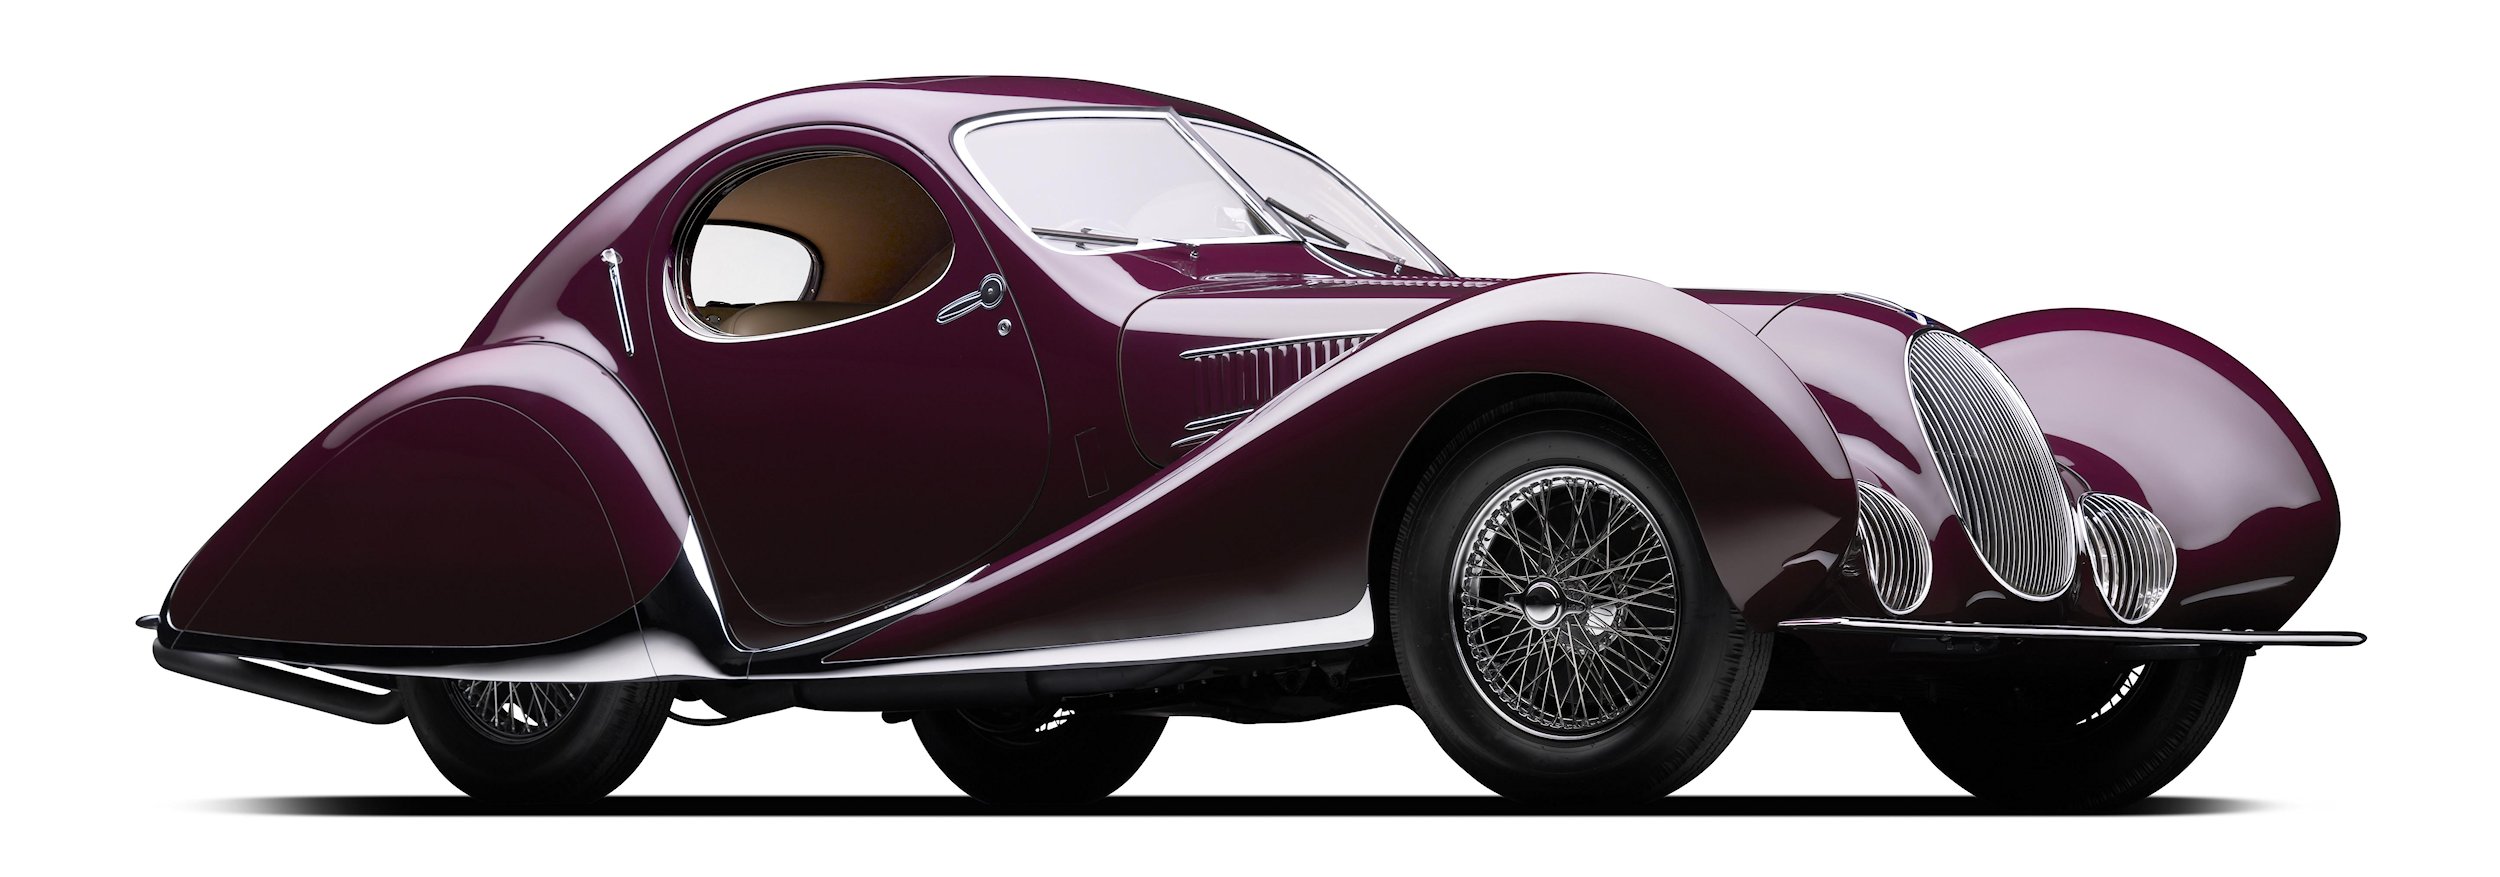 The Mullin Automotive Museum’s 1937 Talbot-Lago T150-C SS ‘Goutte d’Eau, which was just honored as the very first recipient of the Peninsula Classics Best of the Best Award at The Quail, will be on public display in the Mullin Grand Salon at the Petersen Automotive Museum for the next 10 weeks.